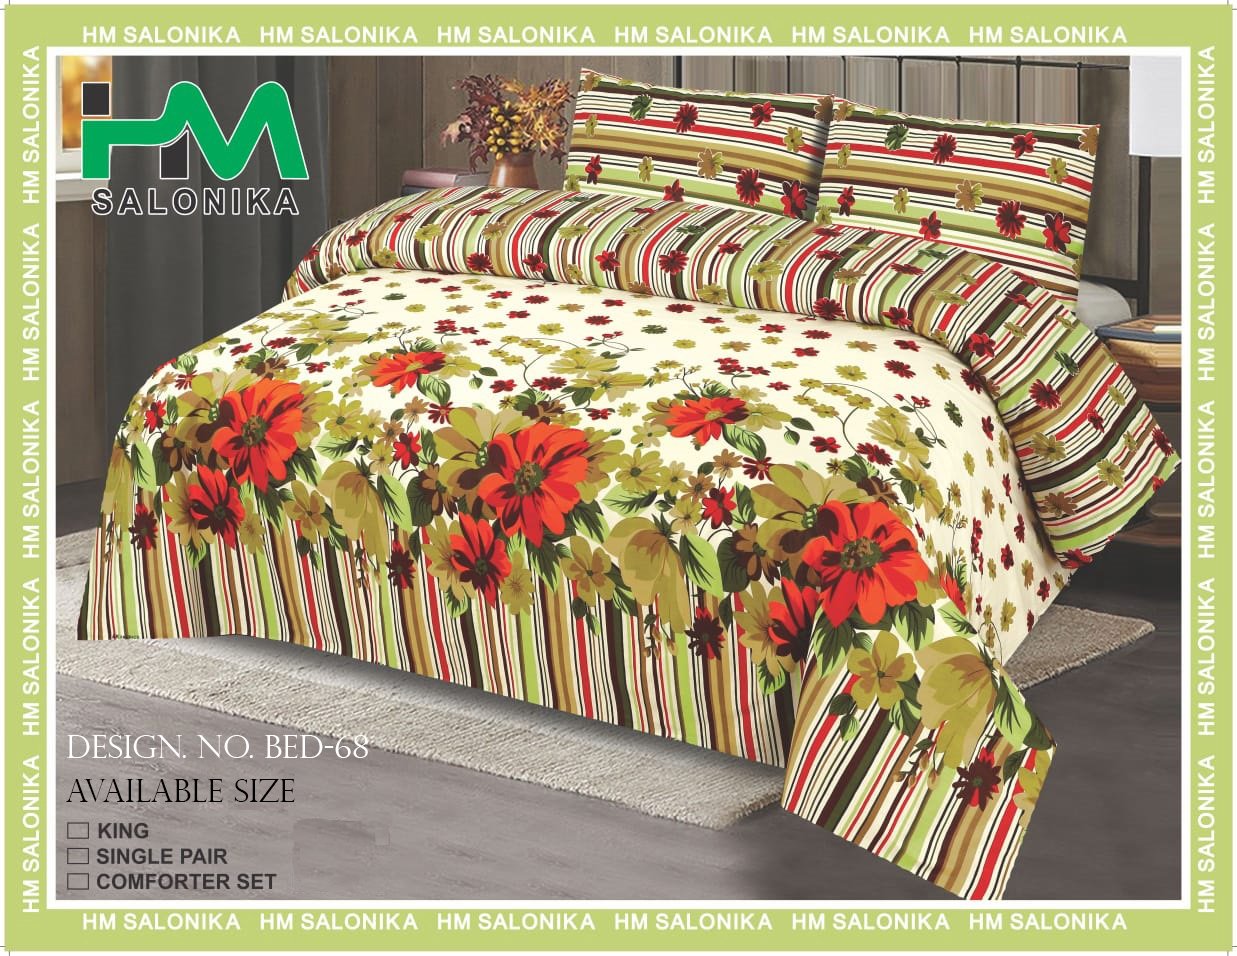 Bed 68 Faisalabad Fabric Store